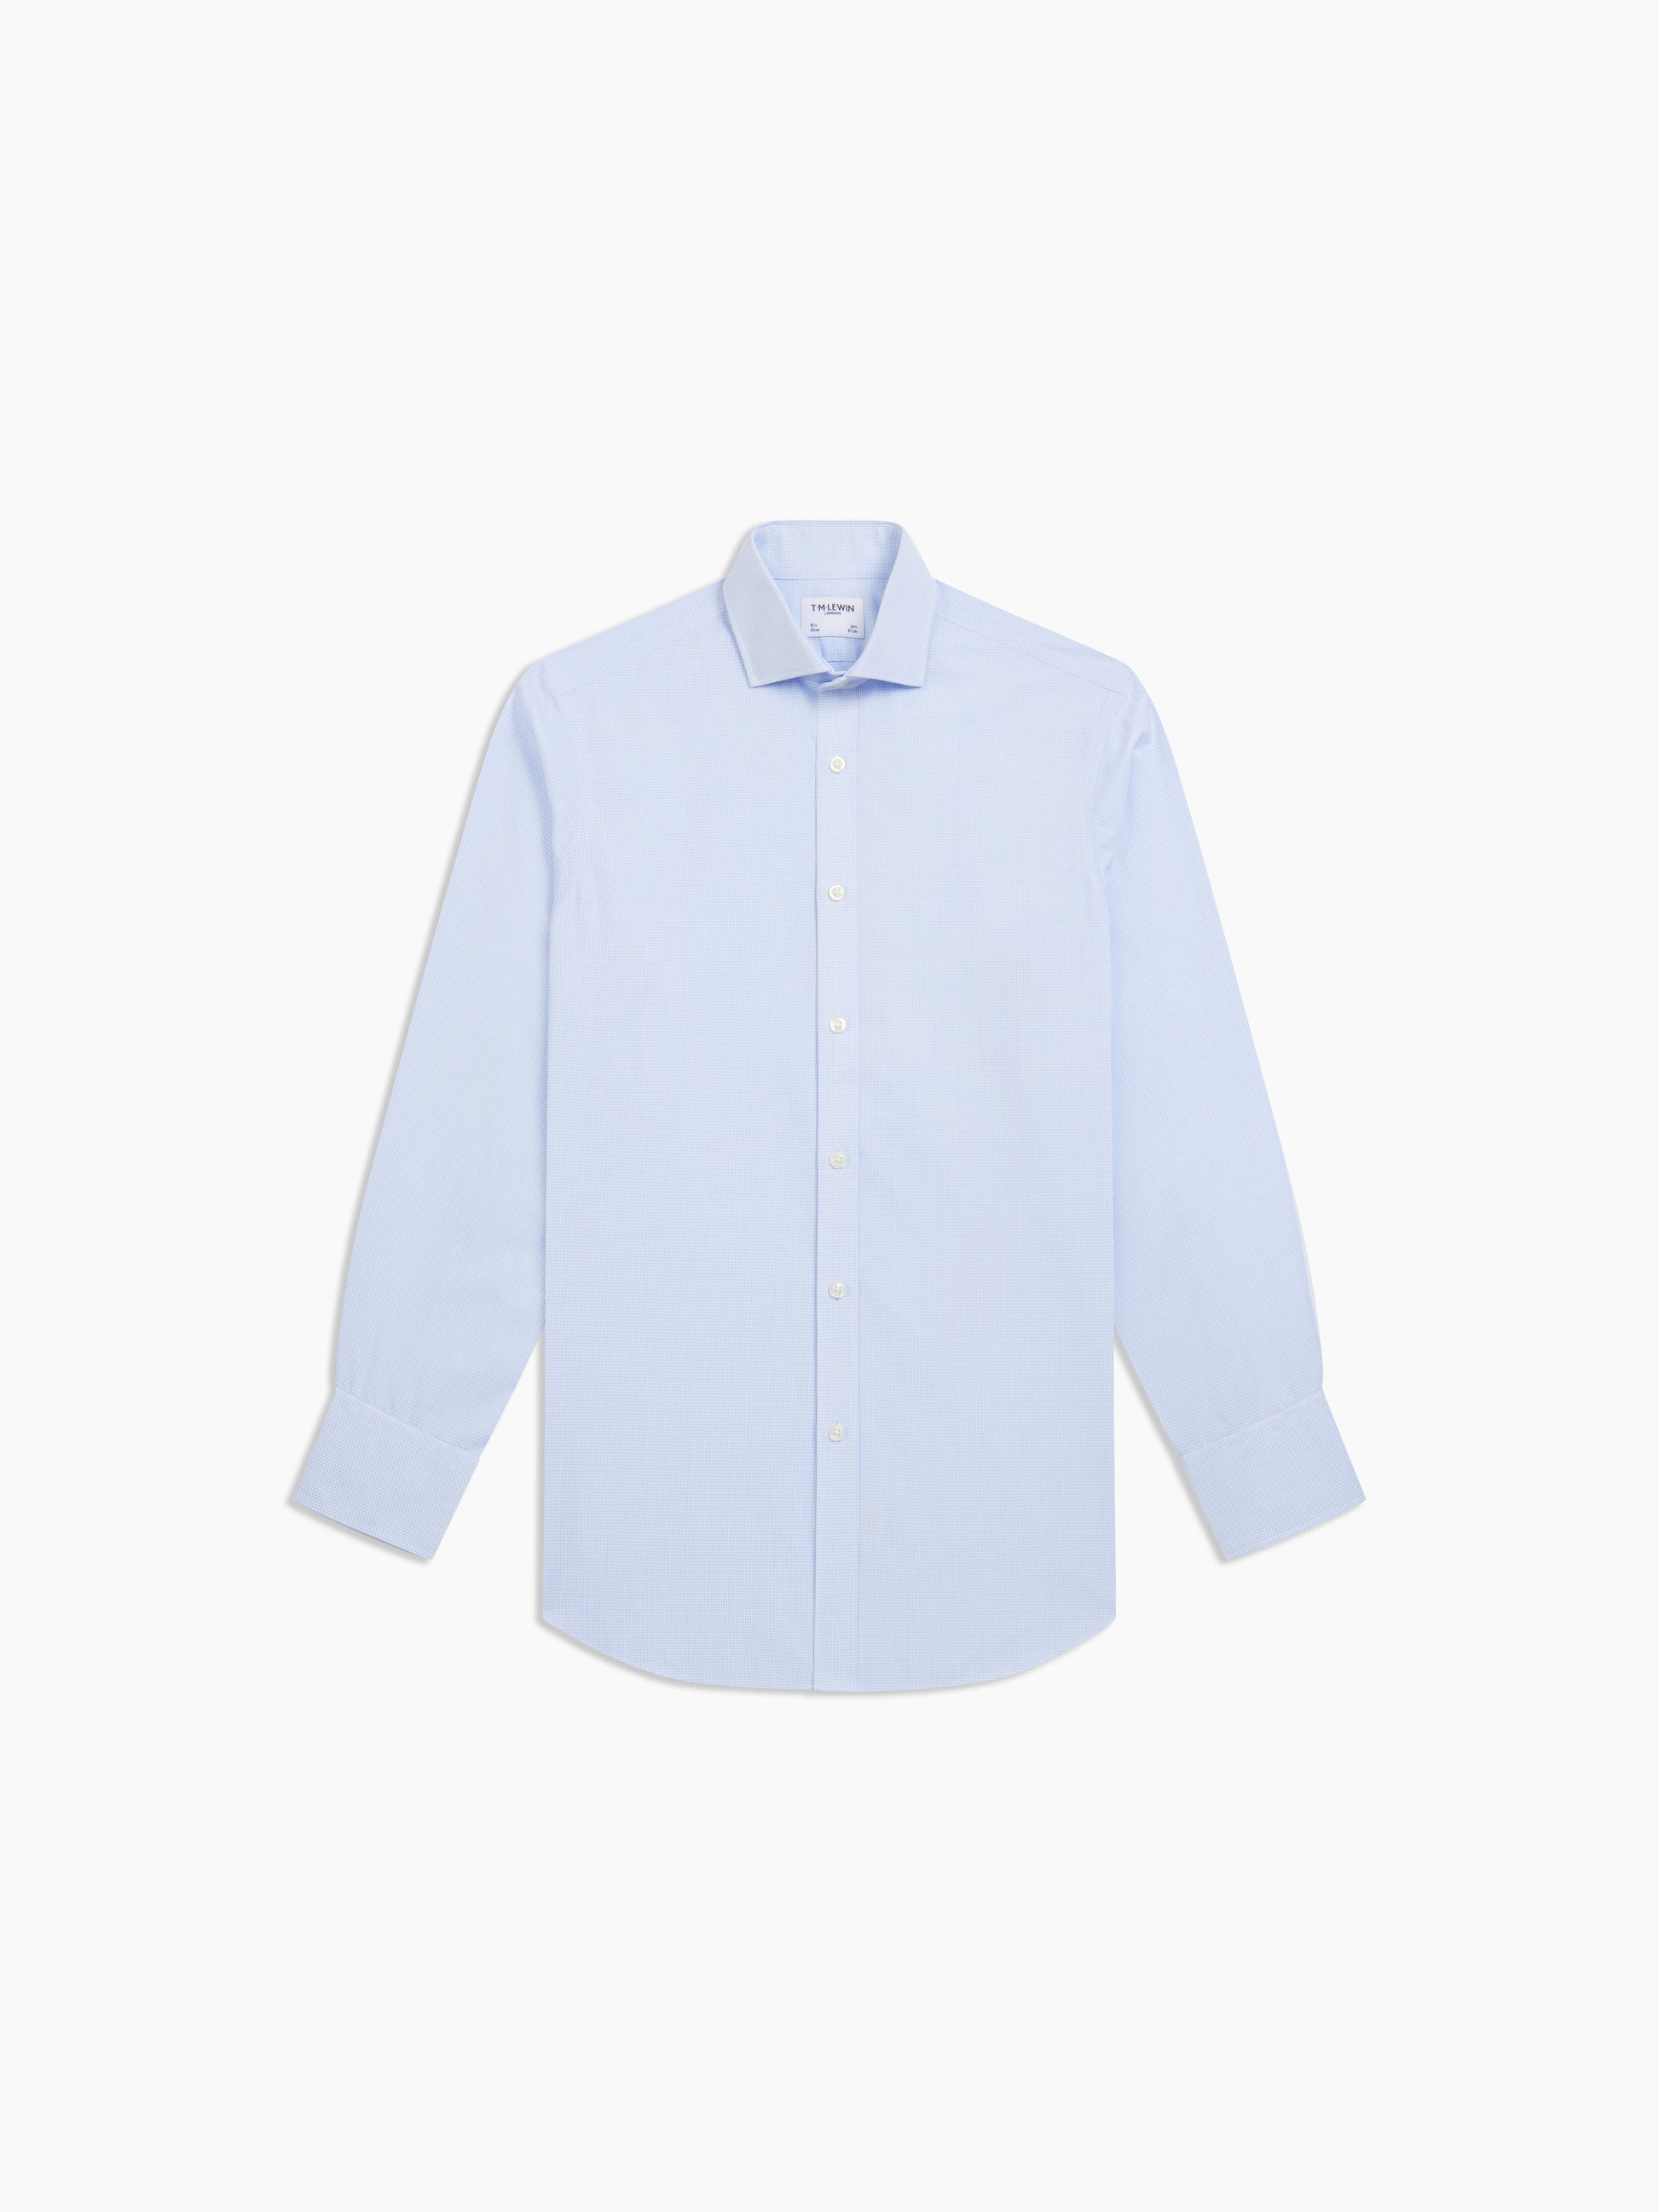 Image 2 of Non-Iron Blue Small Check Dobby Fitted Single Cuff Classic Collar Shirt